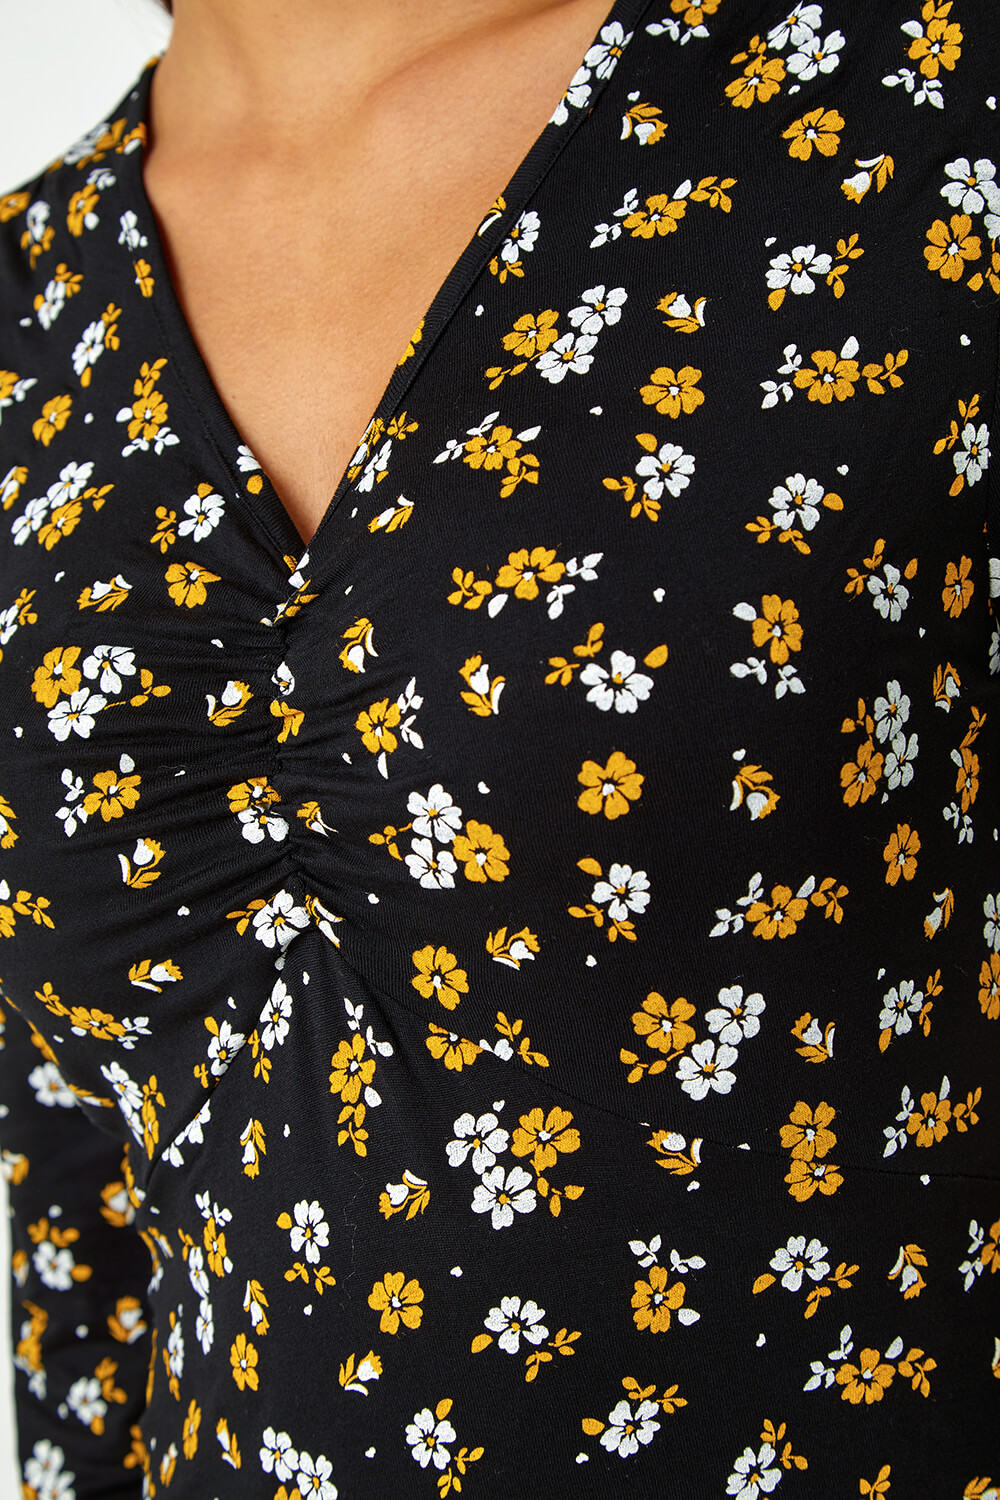 Ochre Floral Print Ruched Stretch Top , Image 5 of 5